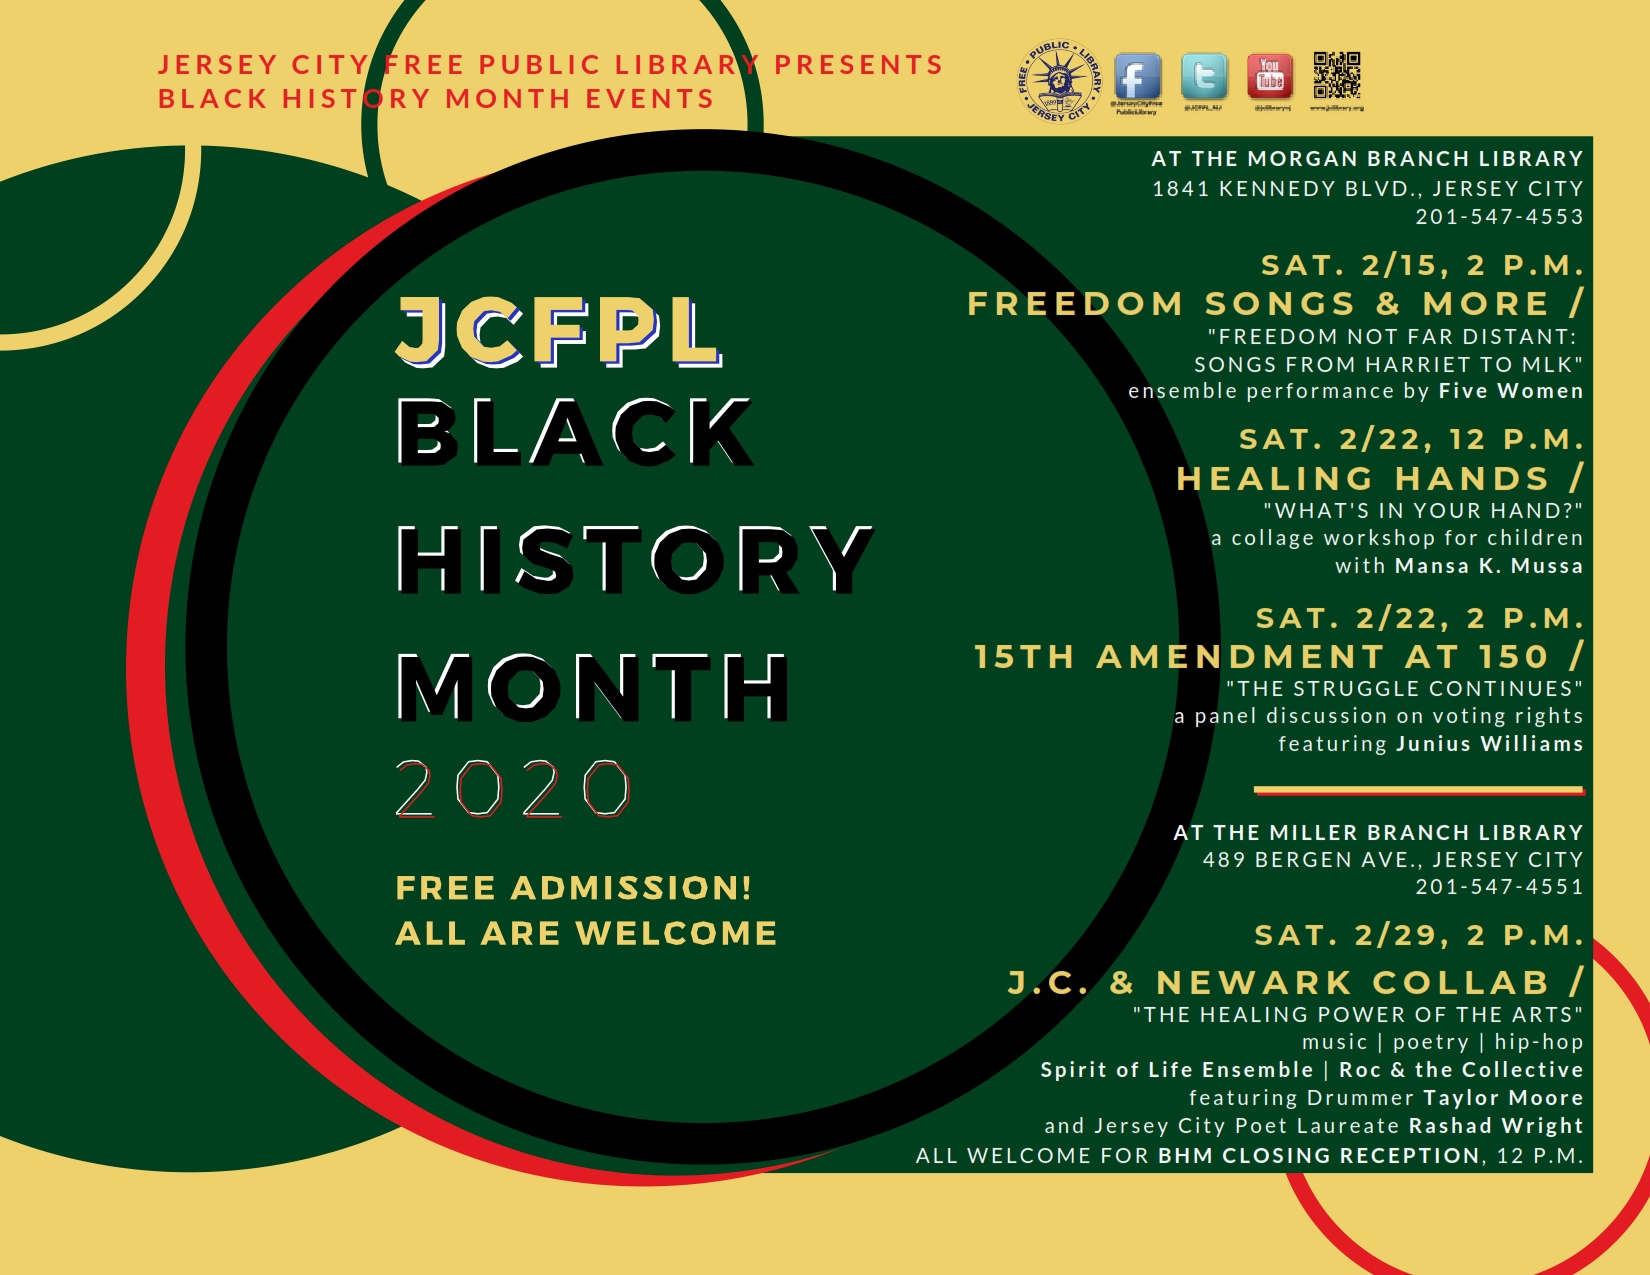 Flyer for JCFPL Black History Month 2020 with schedule